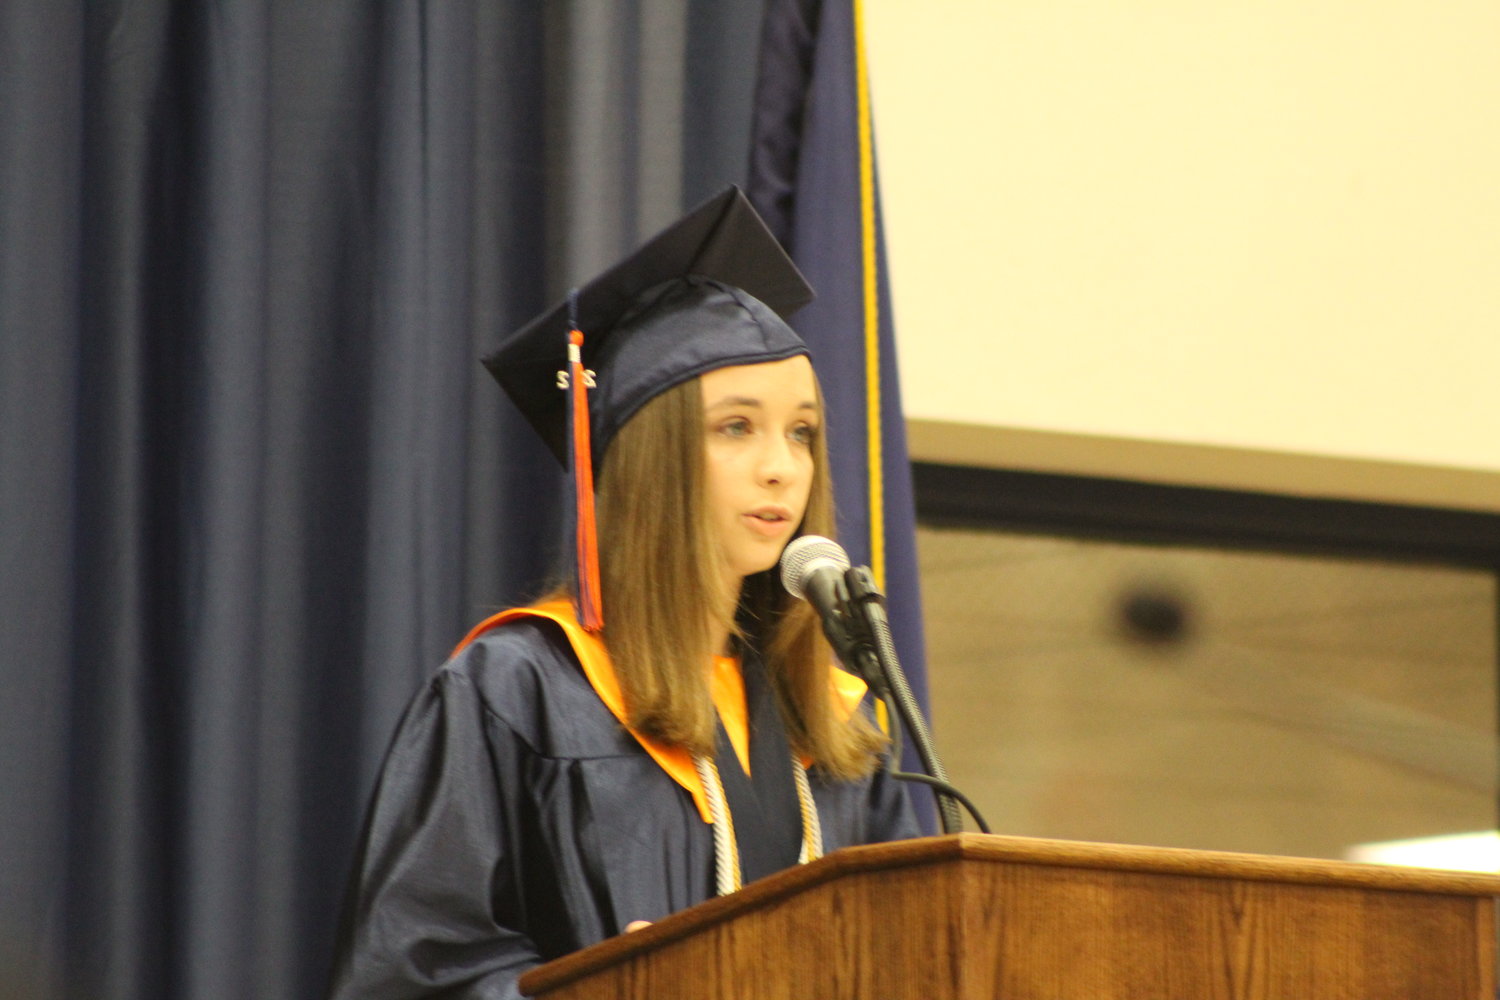 Kylie Bradford also gave one of the commencement addresses to the Class of 2022.